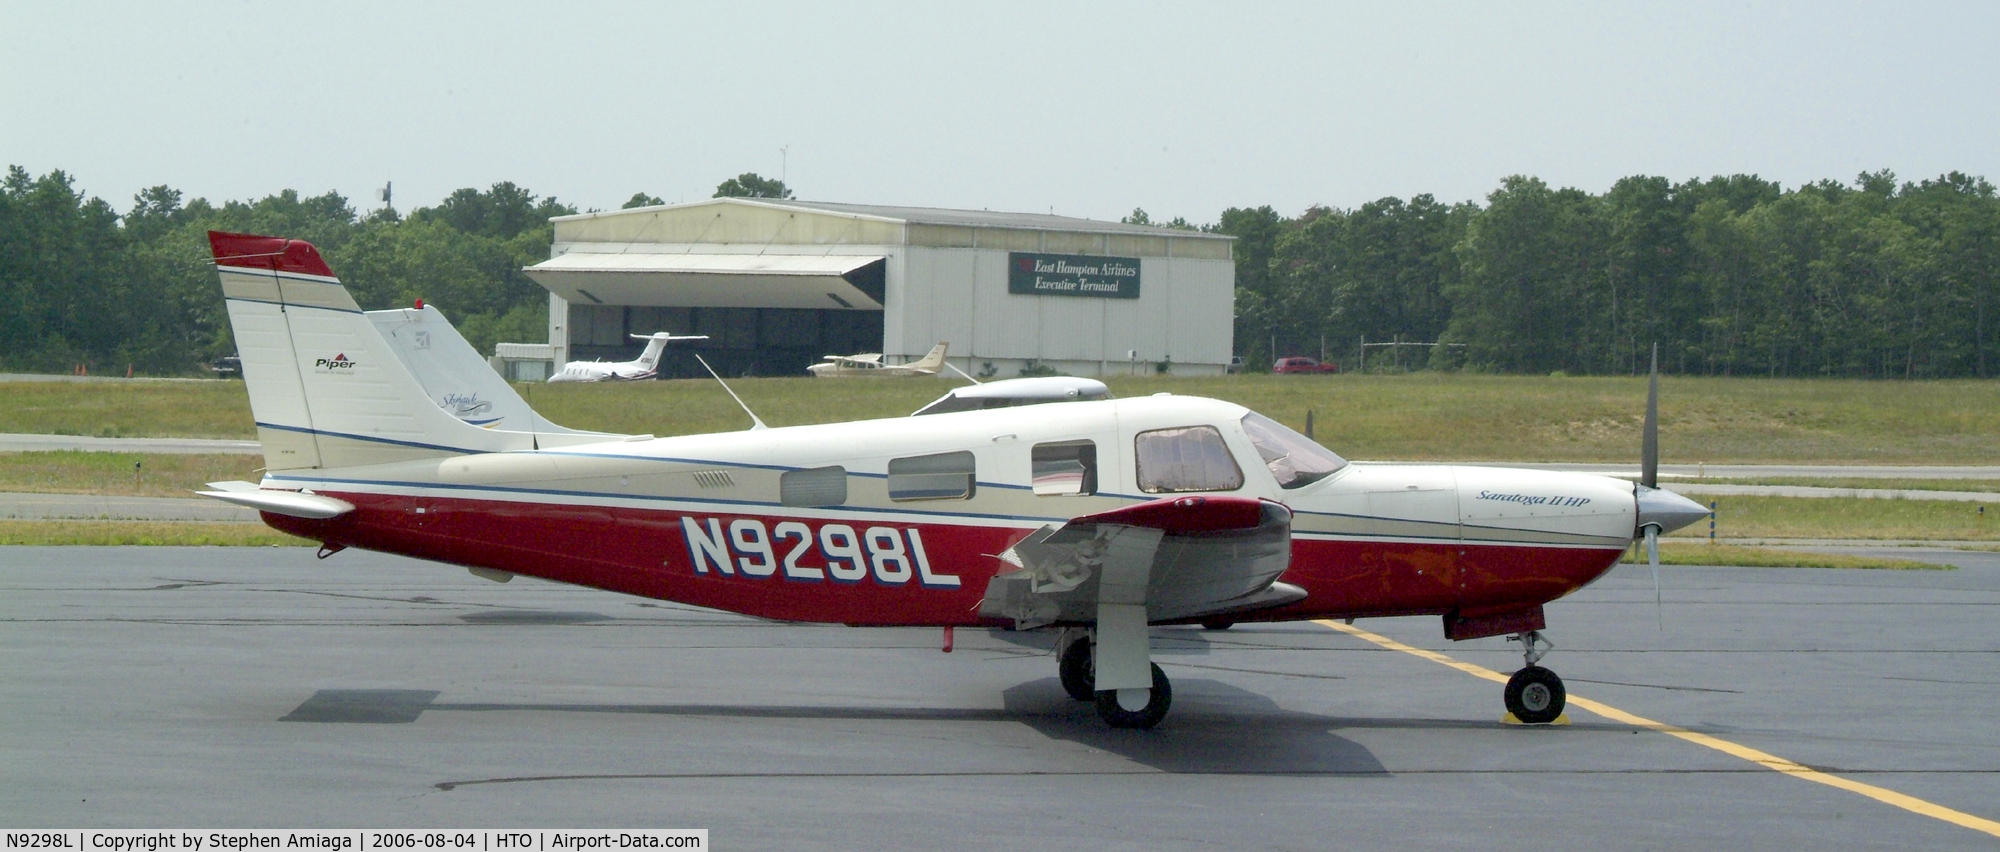 N9298L, 1998 Piper PA-32R-301 C/N 3246108, A nice Saratoga sitting on the ramp...ready to go.